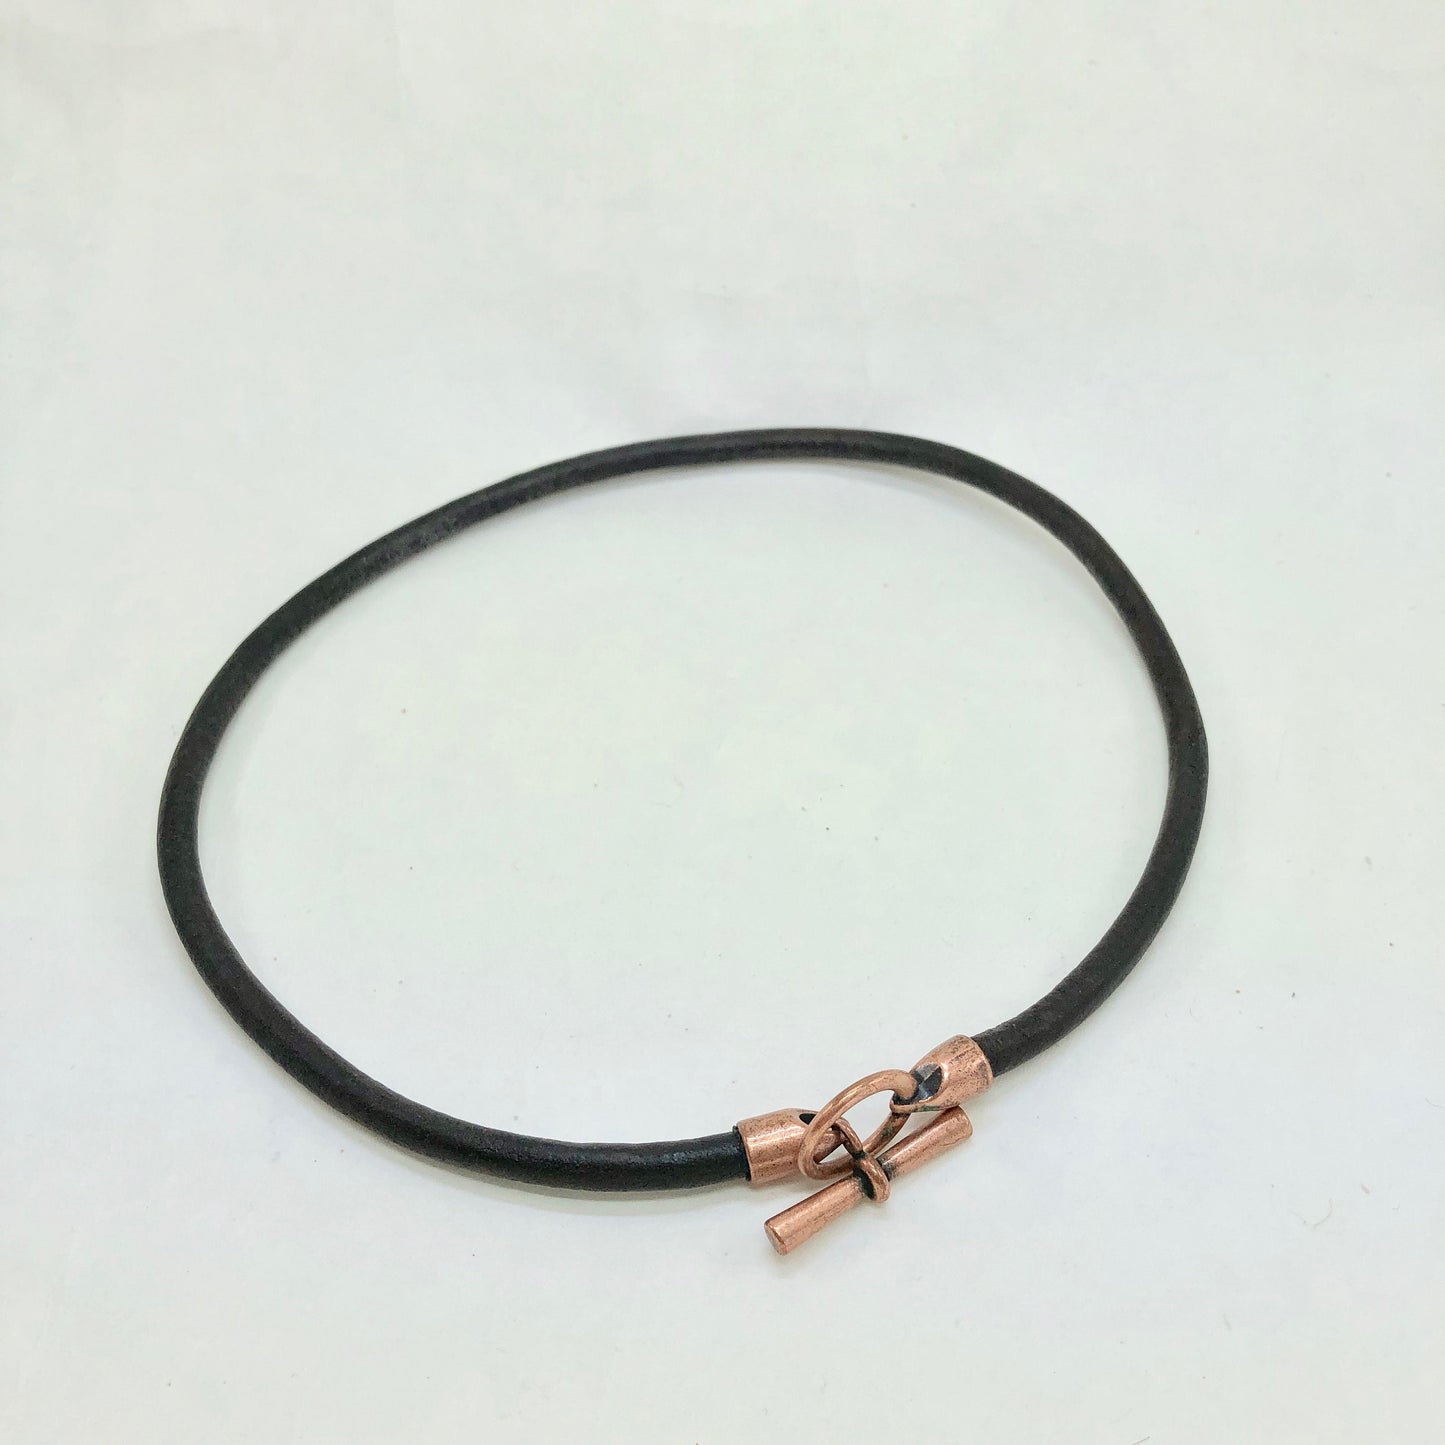 Leather Necklace. Striking Italian black leather choker necklace fashioned with a center copper toggle clasp.